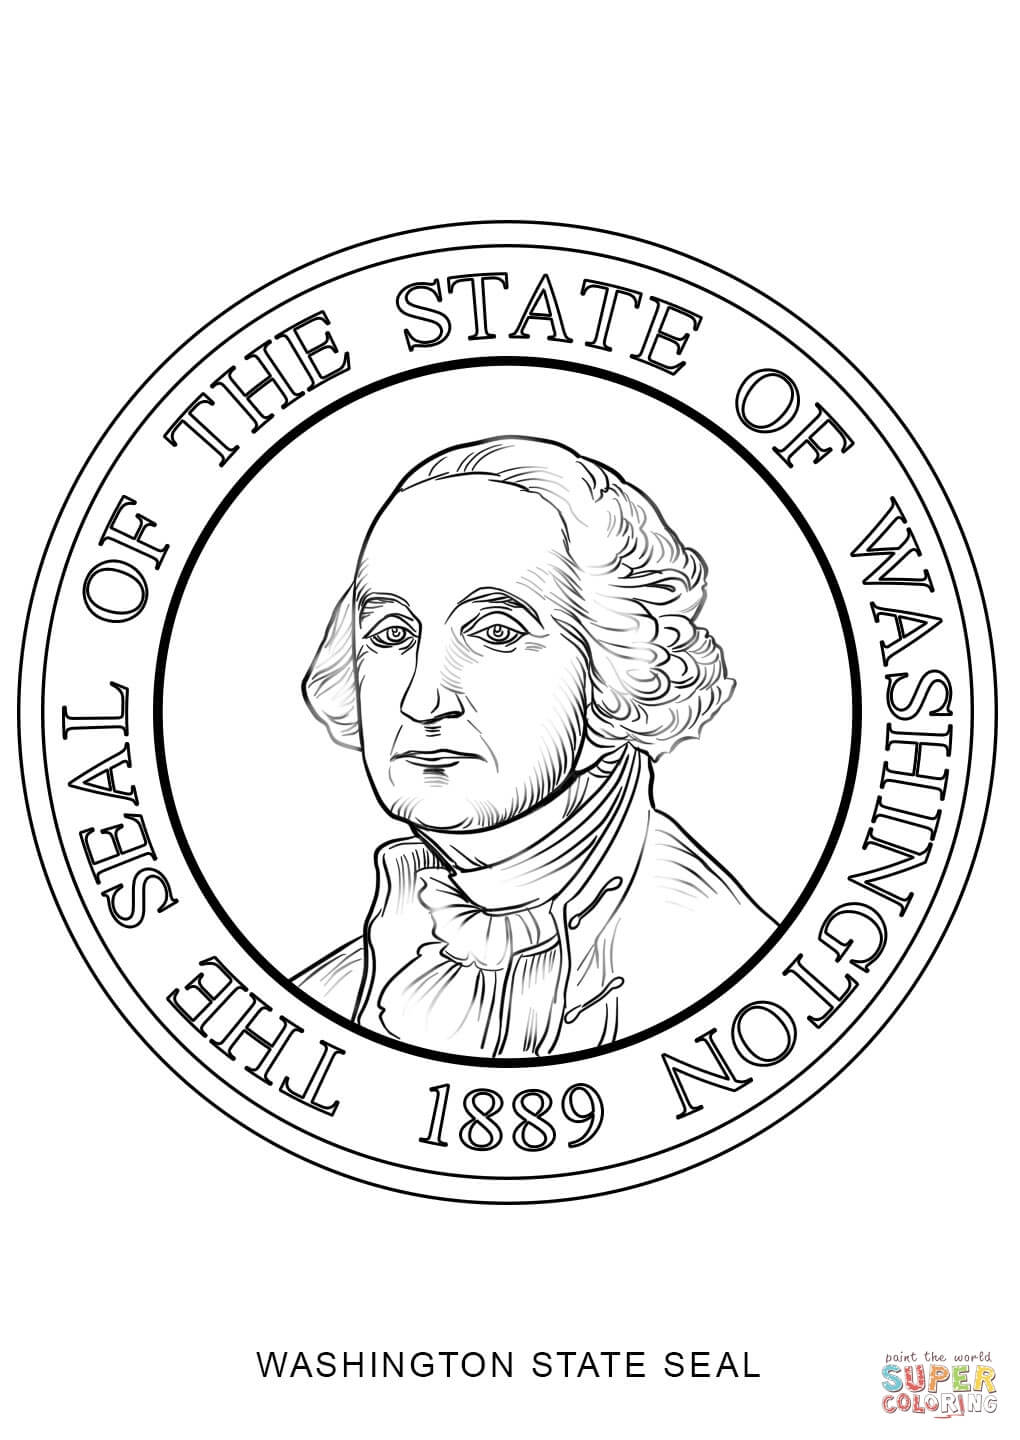 Washington State Seal coloring page | Free Printable Coloring Pages